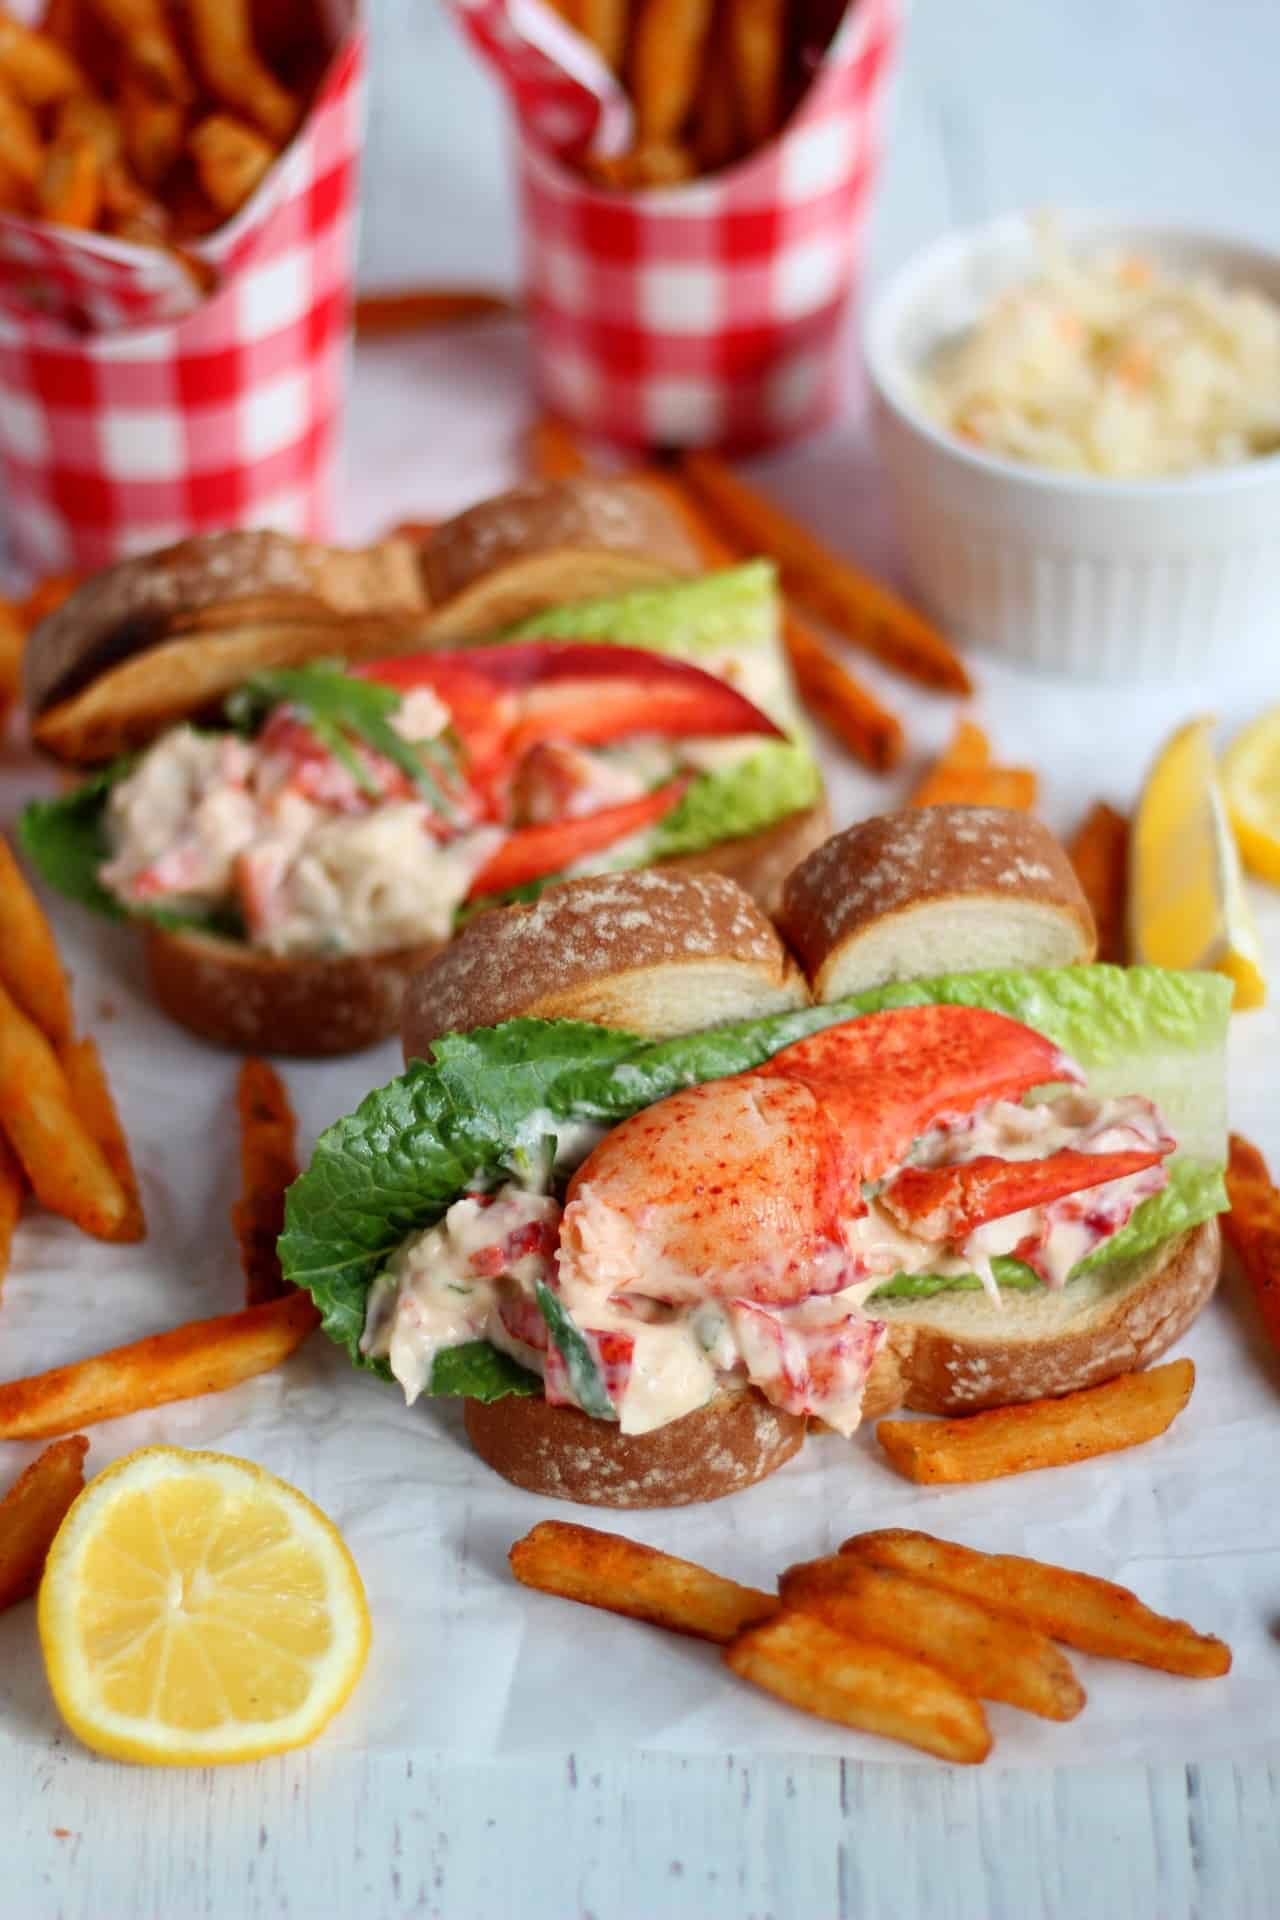 filled hot dog buns with lobster mixture and salad. Sweet potato french fries laying around.